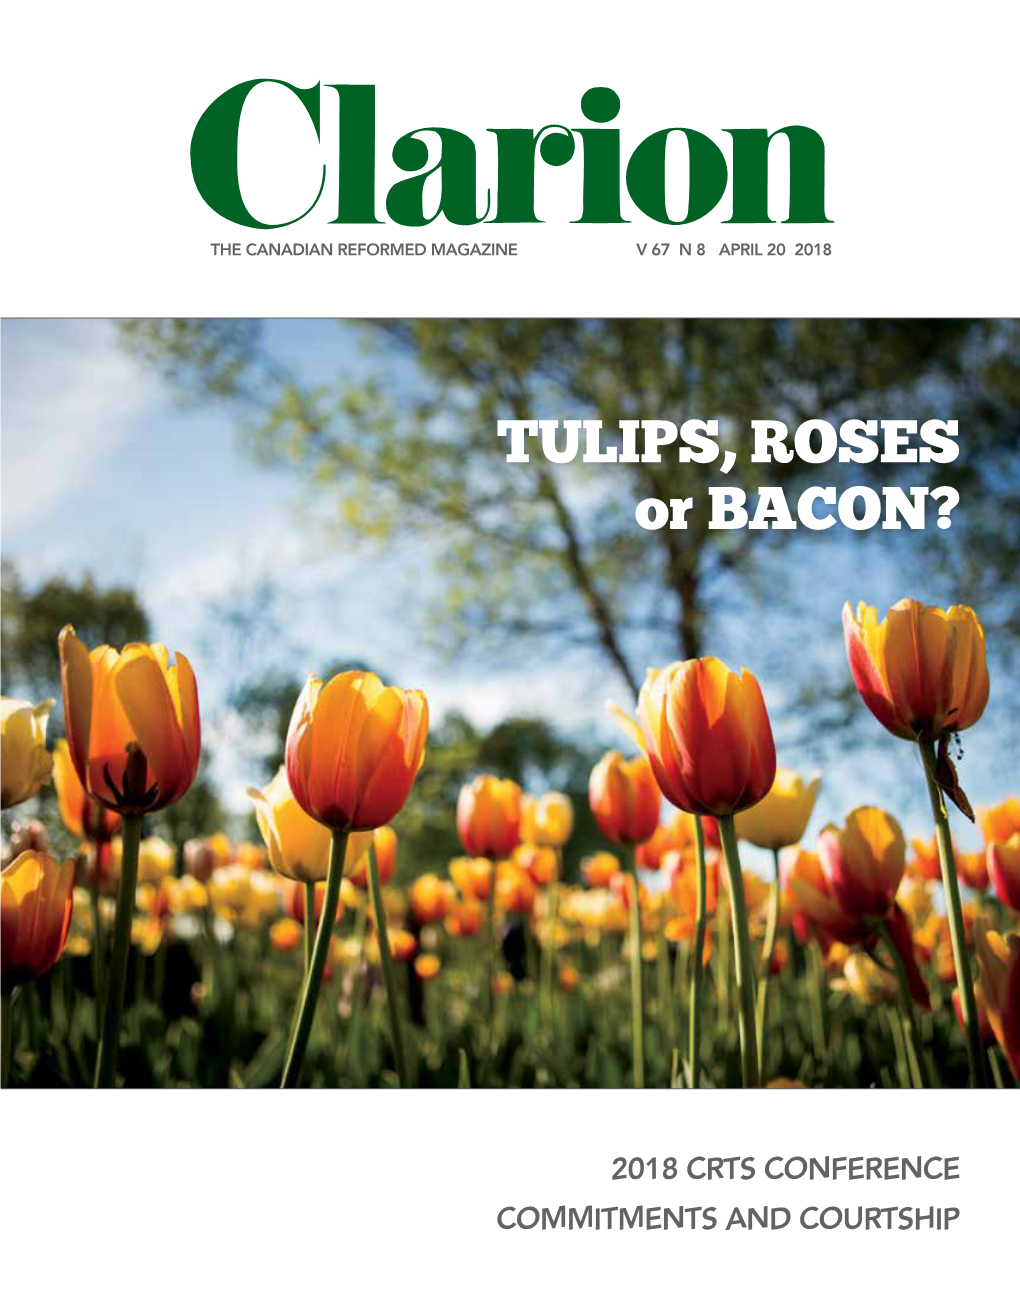 TULIPS, ROSES Or BACON?